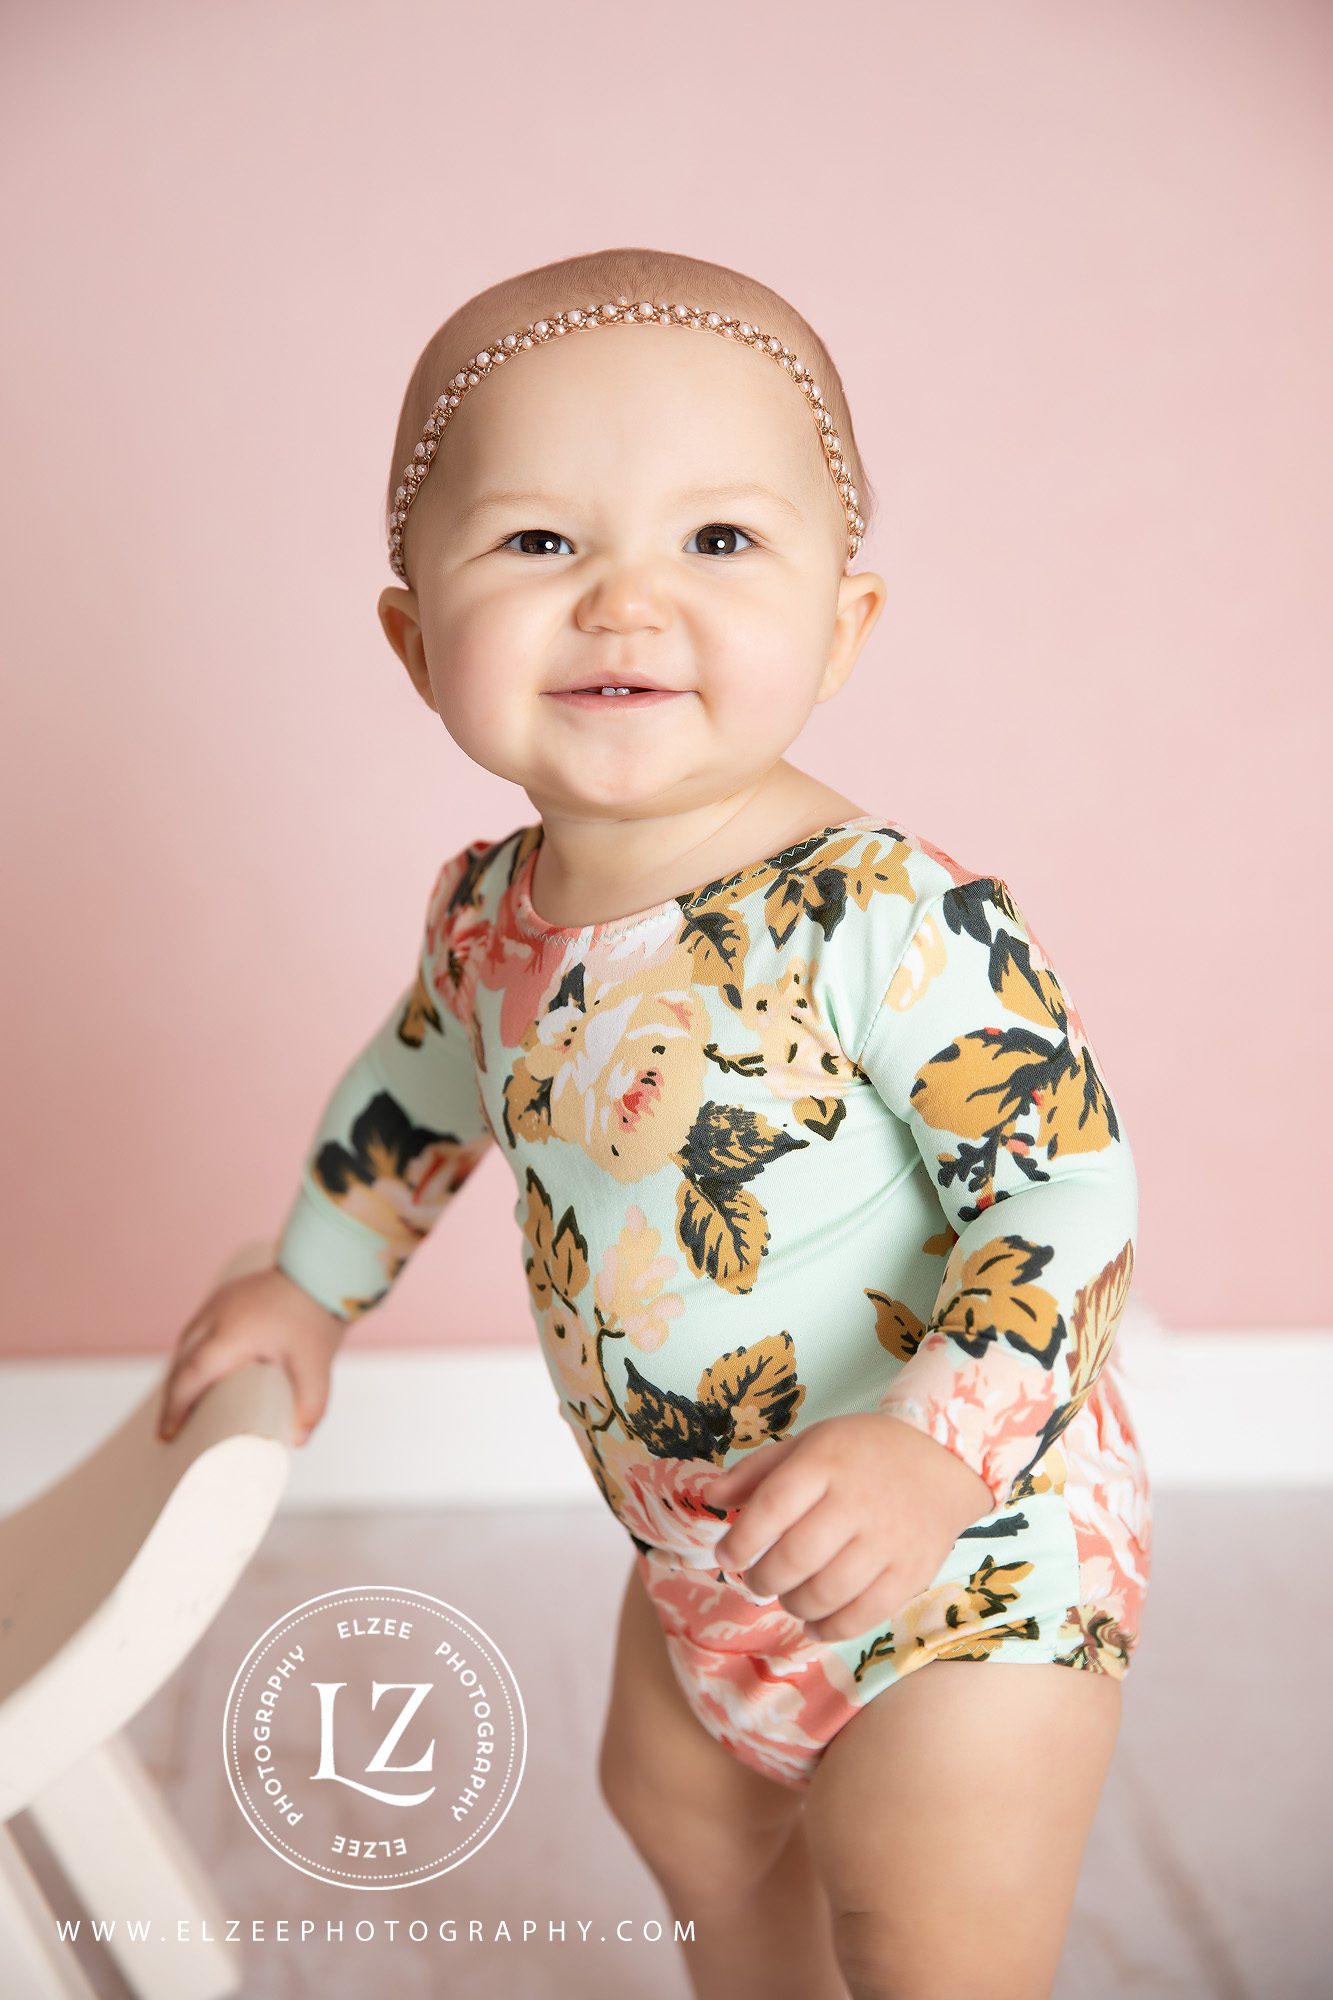 Baby girl in floral romper, baby photography 